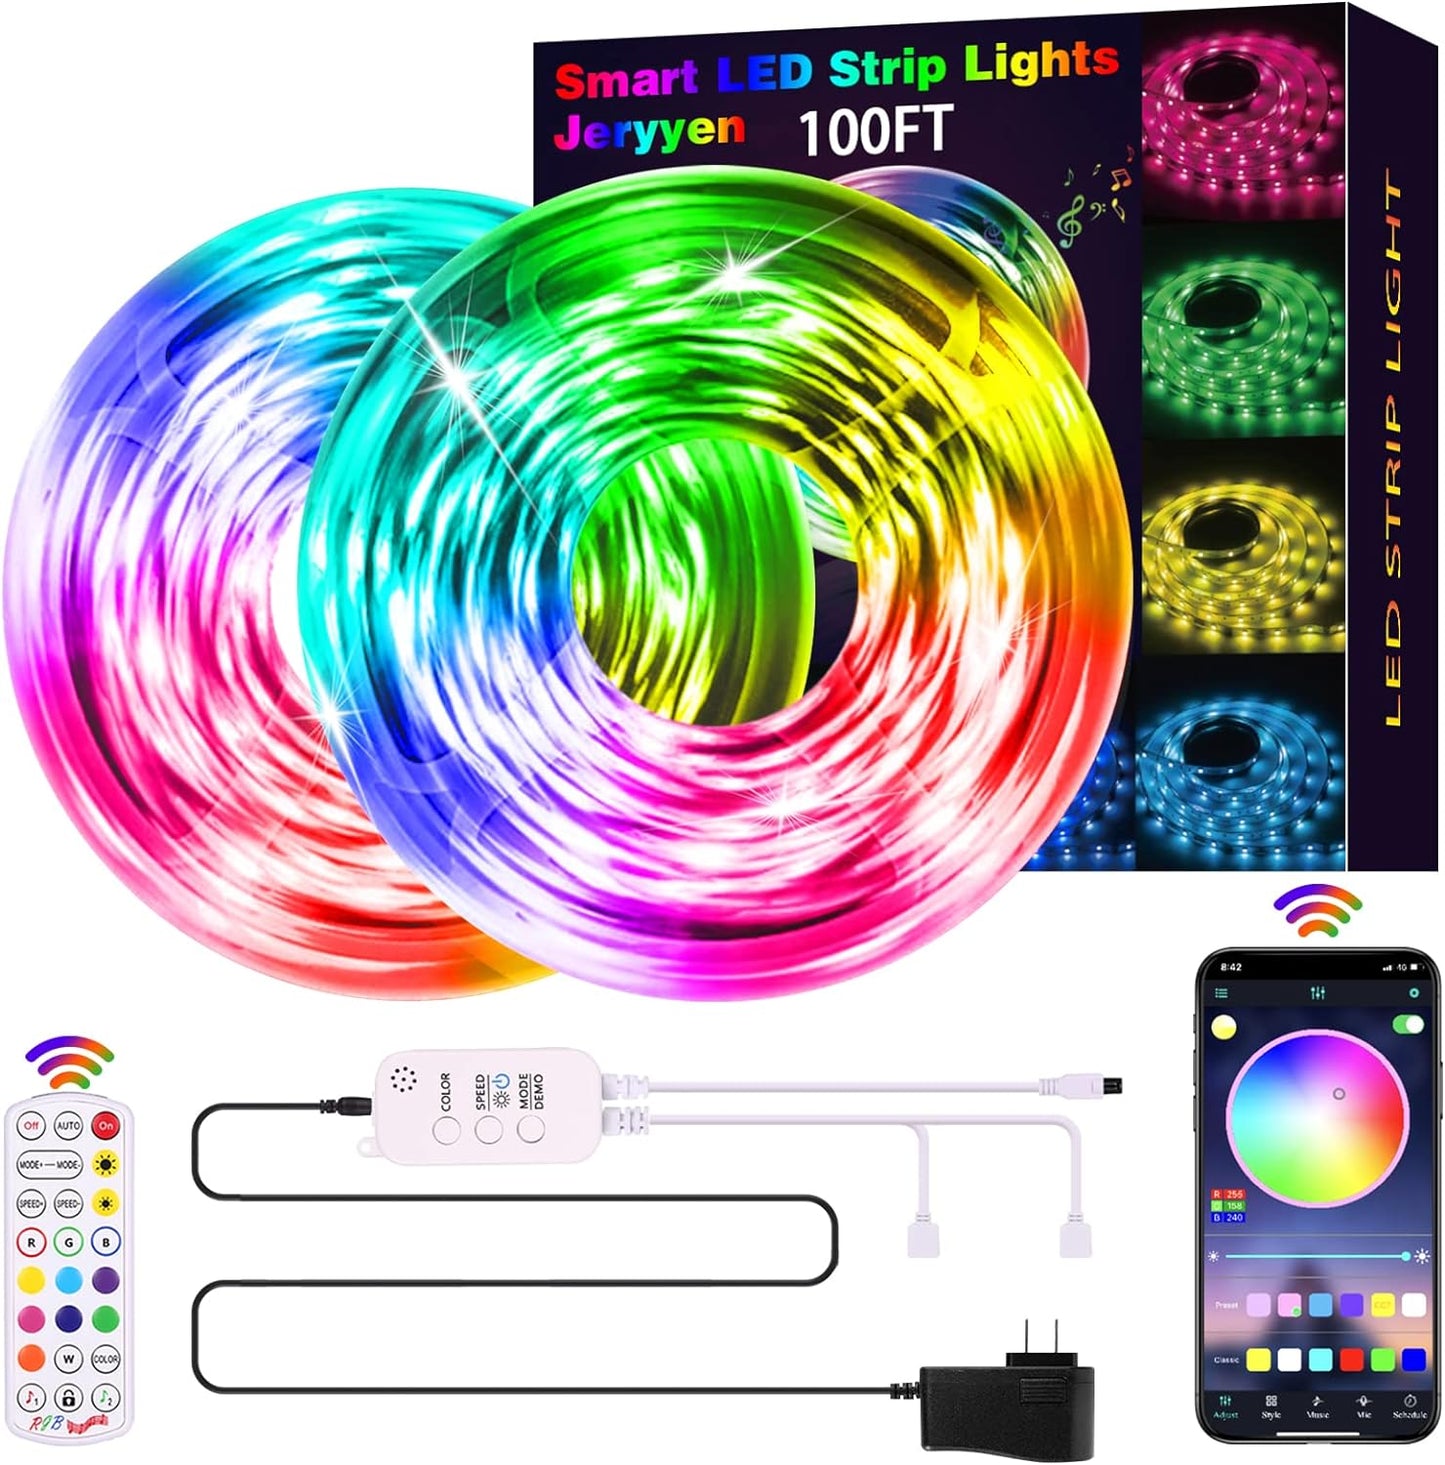 Elevate Your Space with 100Ft RGB Smart LED Strip Lights - Music Sync, Color Changing, Remote and App Control for Bedroom, TV, Home, and Party Decoration